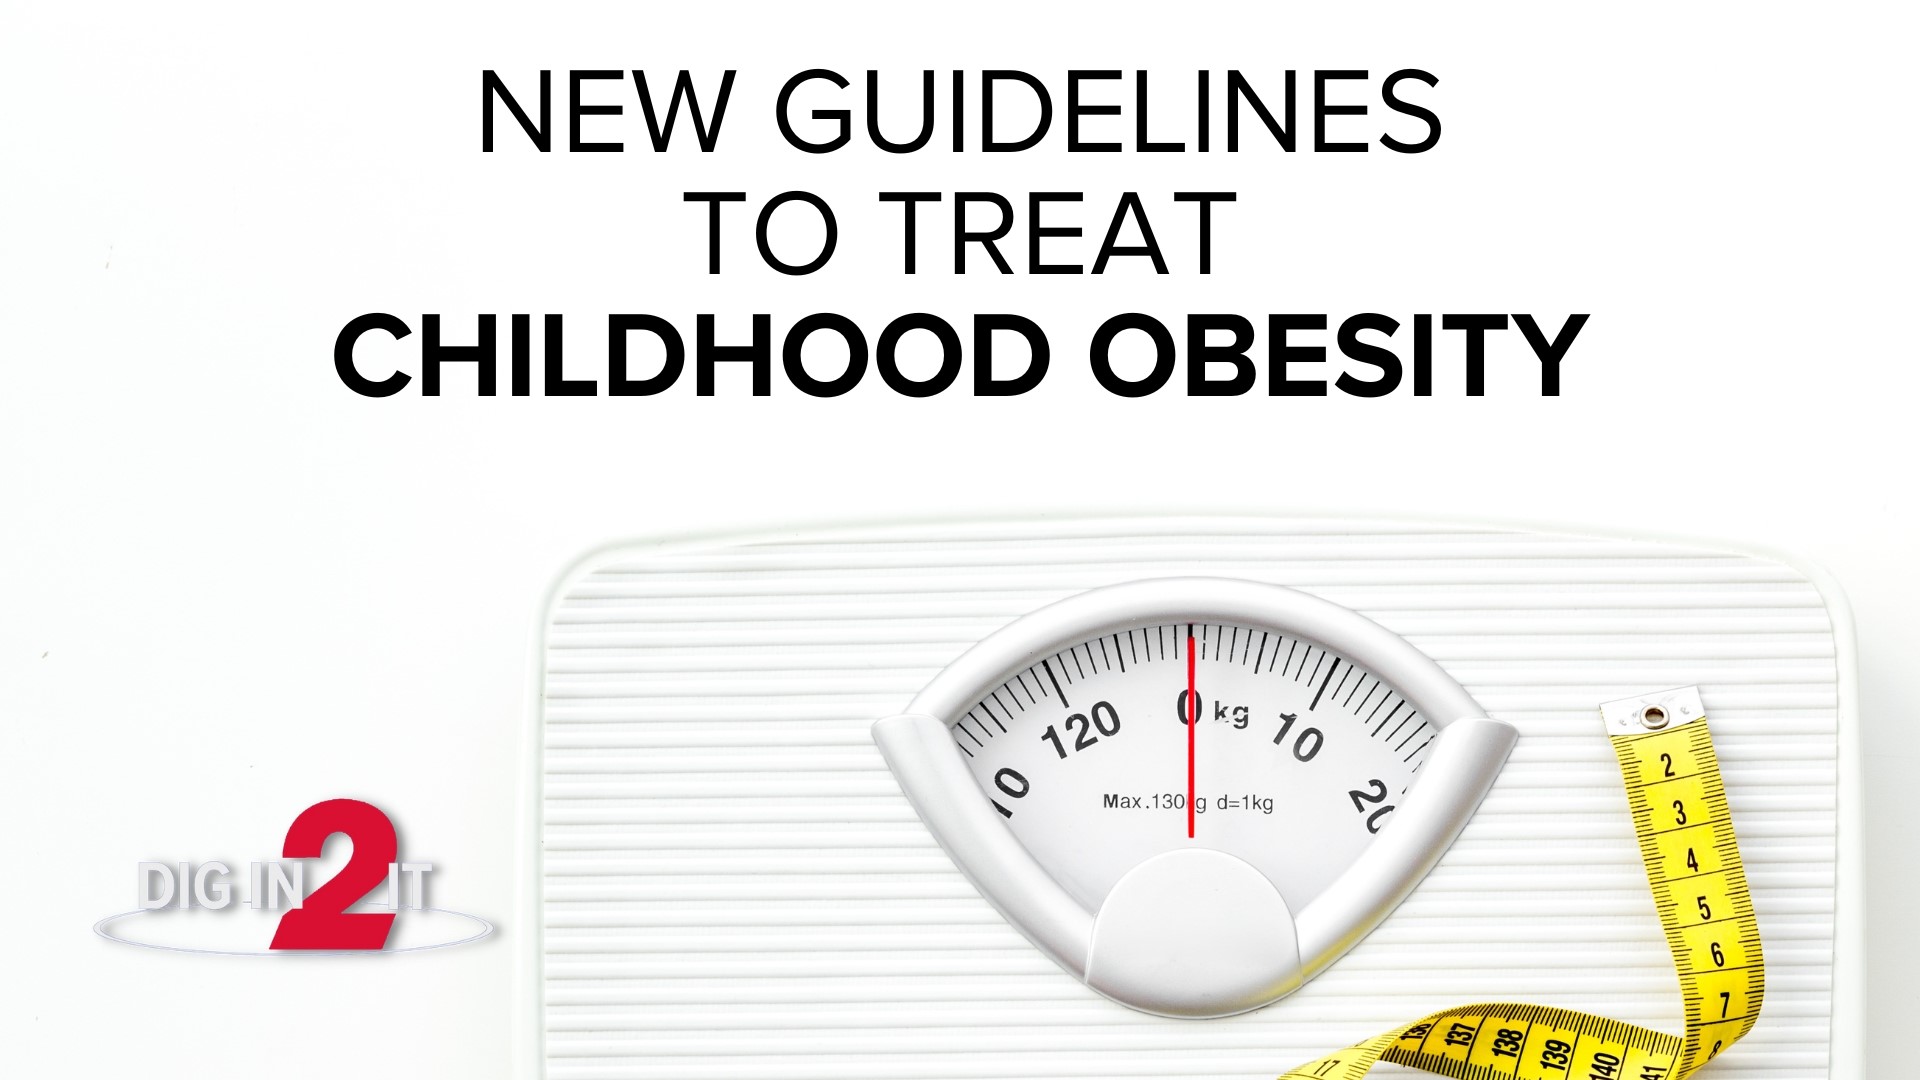 New health guidelines are intended to prevent health problems later in life for currently obese children.